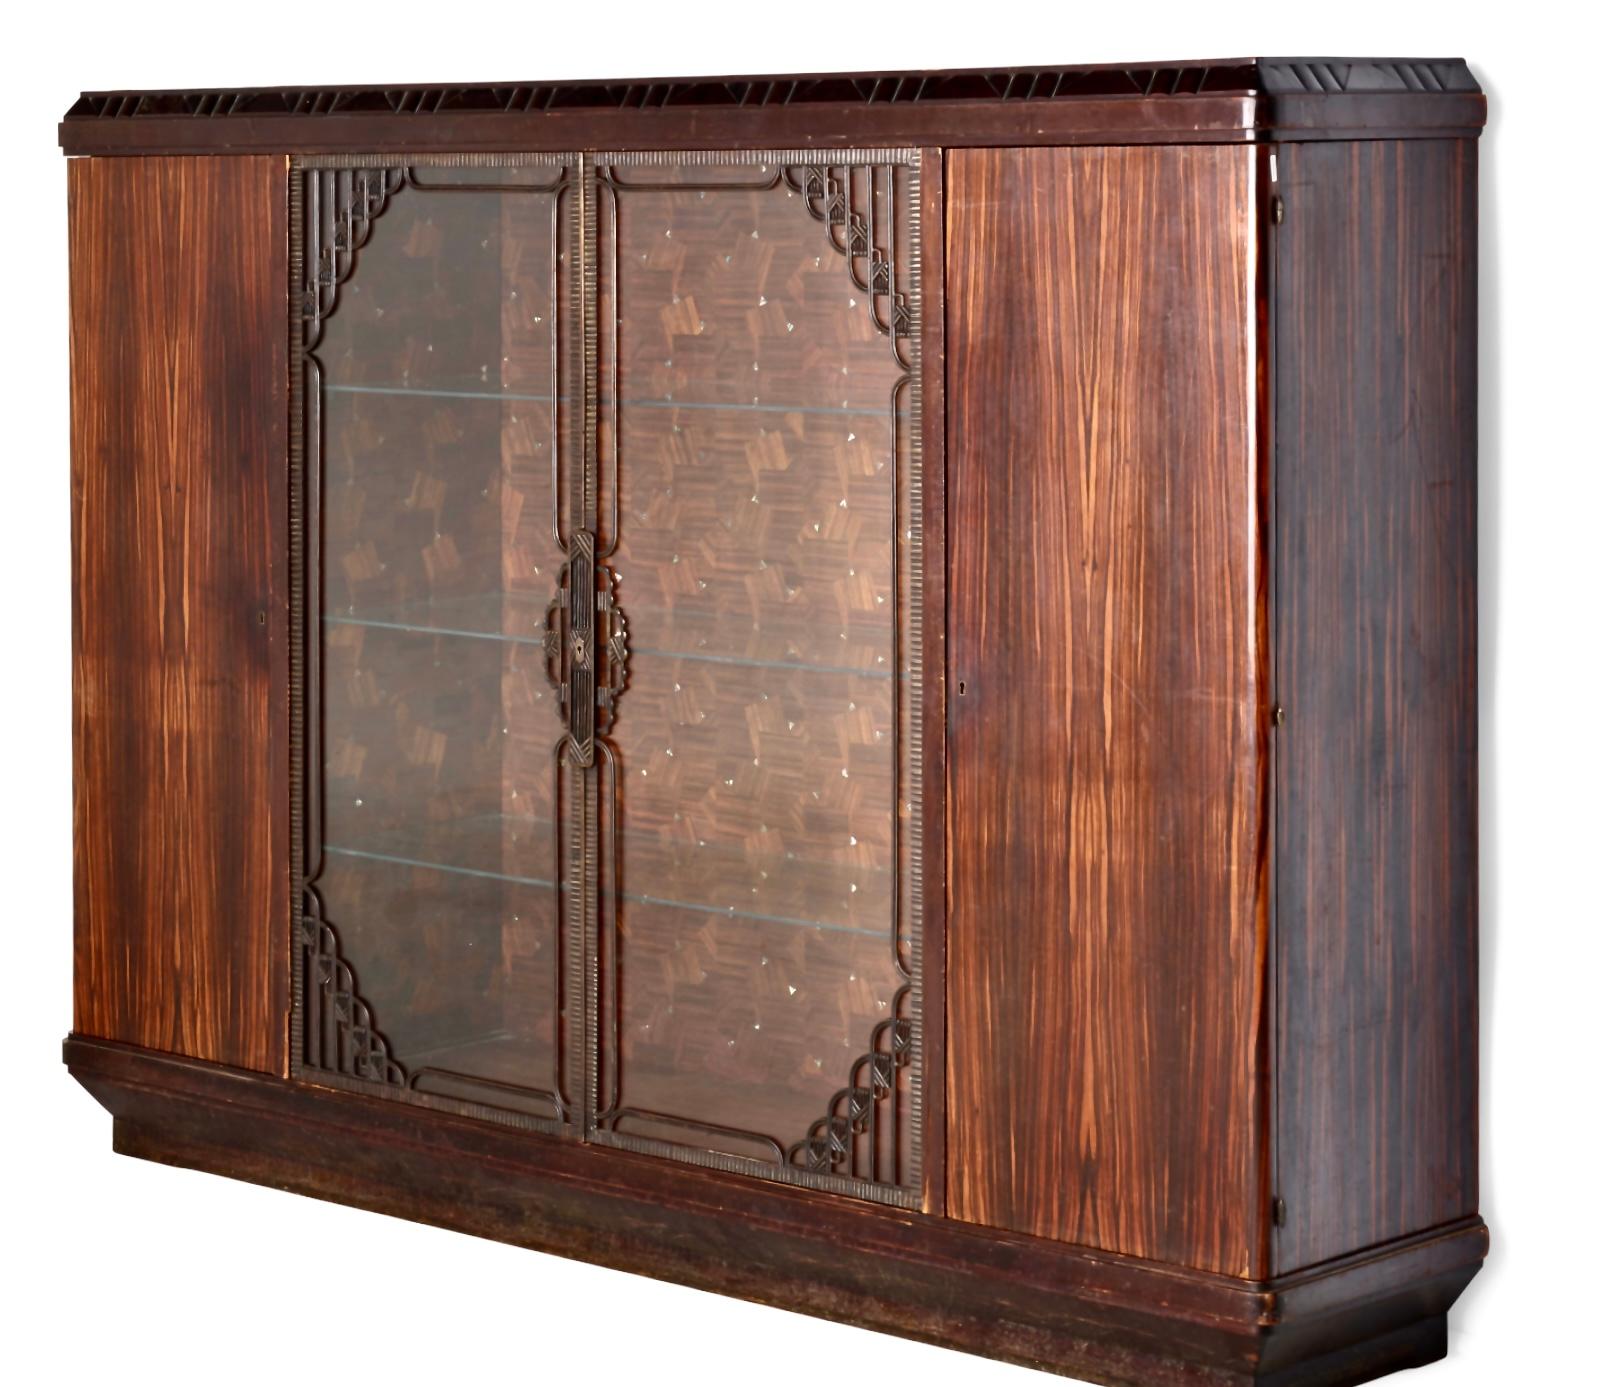 Louis Majorelle, cabinet, France, c. 1919, Macassar ebony, mahogany, mother-of-pearl, glass, patinated bronze. Measures: 66¾ h × 89¼ w × 19½ d in (170 × 227 × 50 cm). Cabinet features four doors concealing three fixed shelves in the center and open